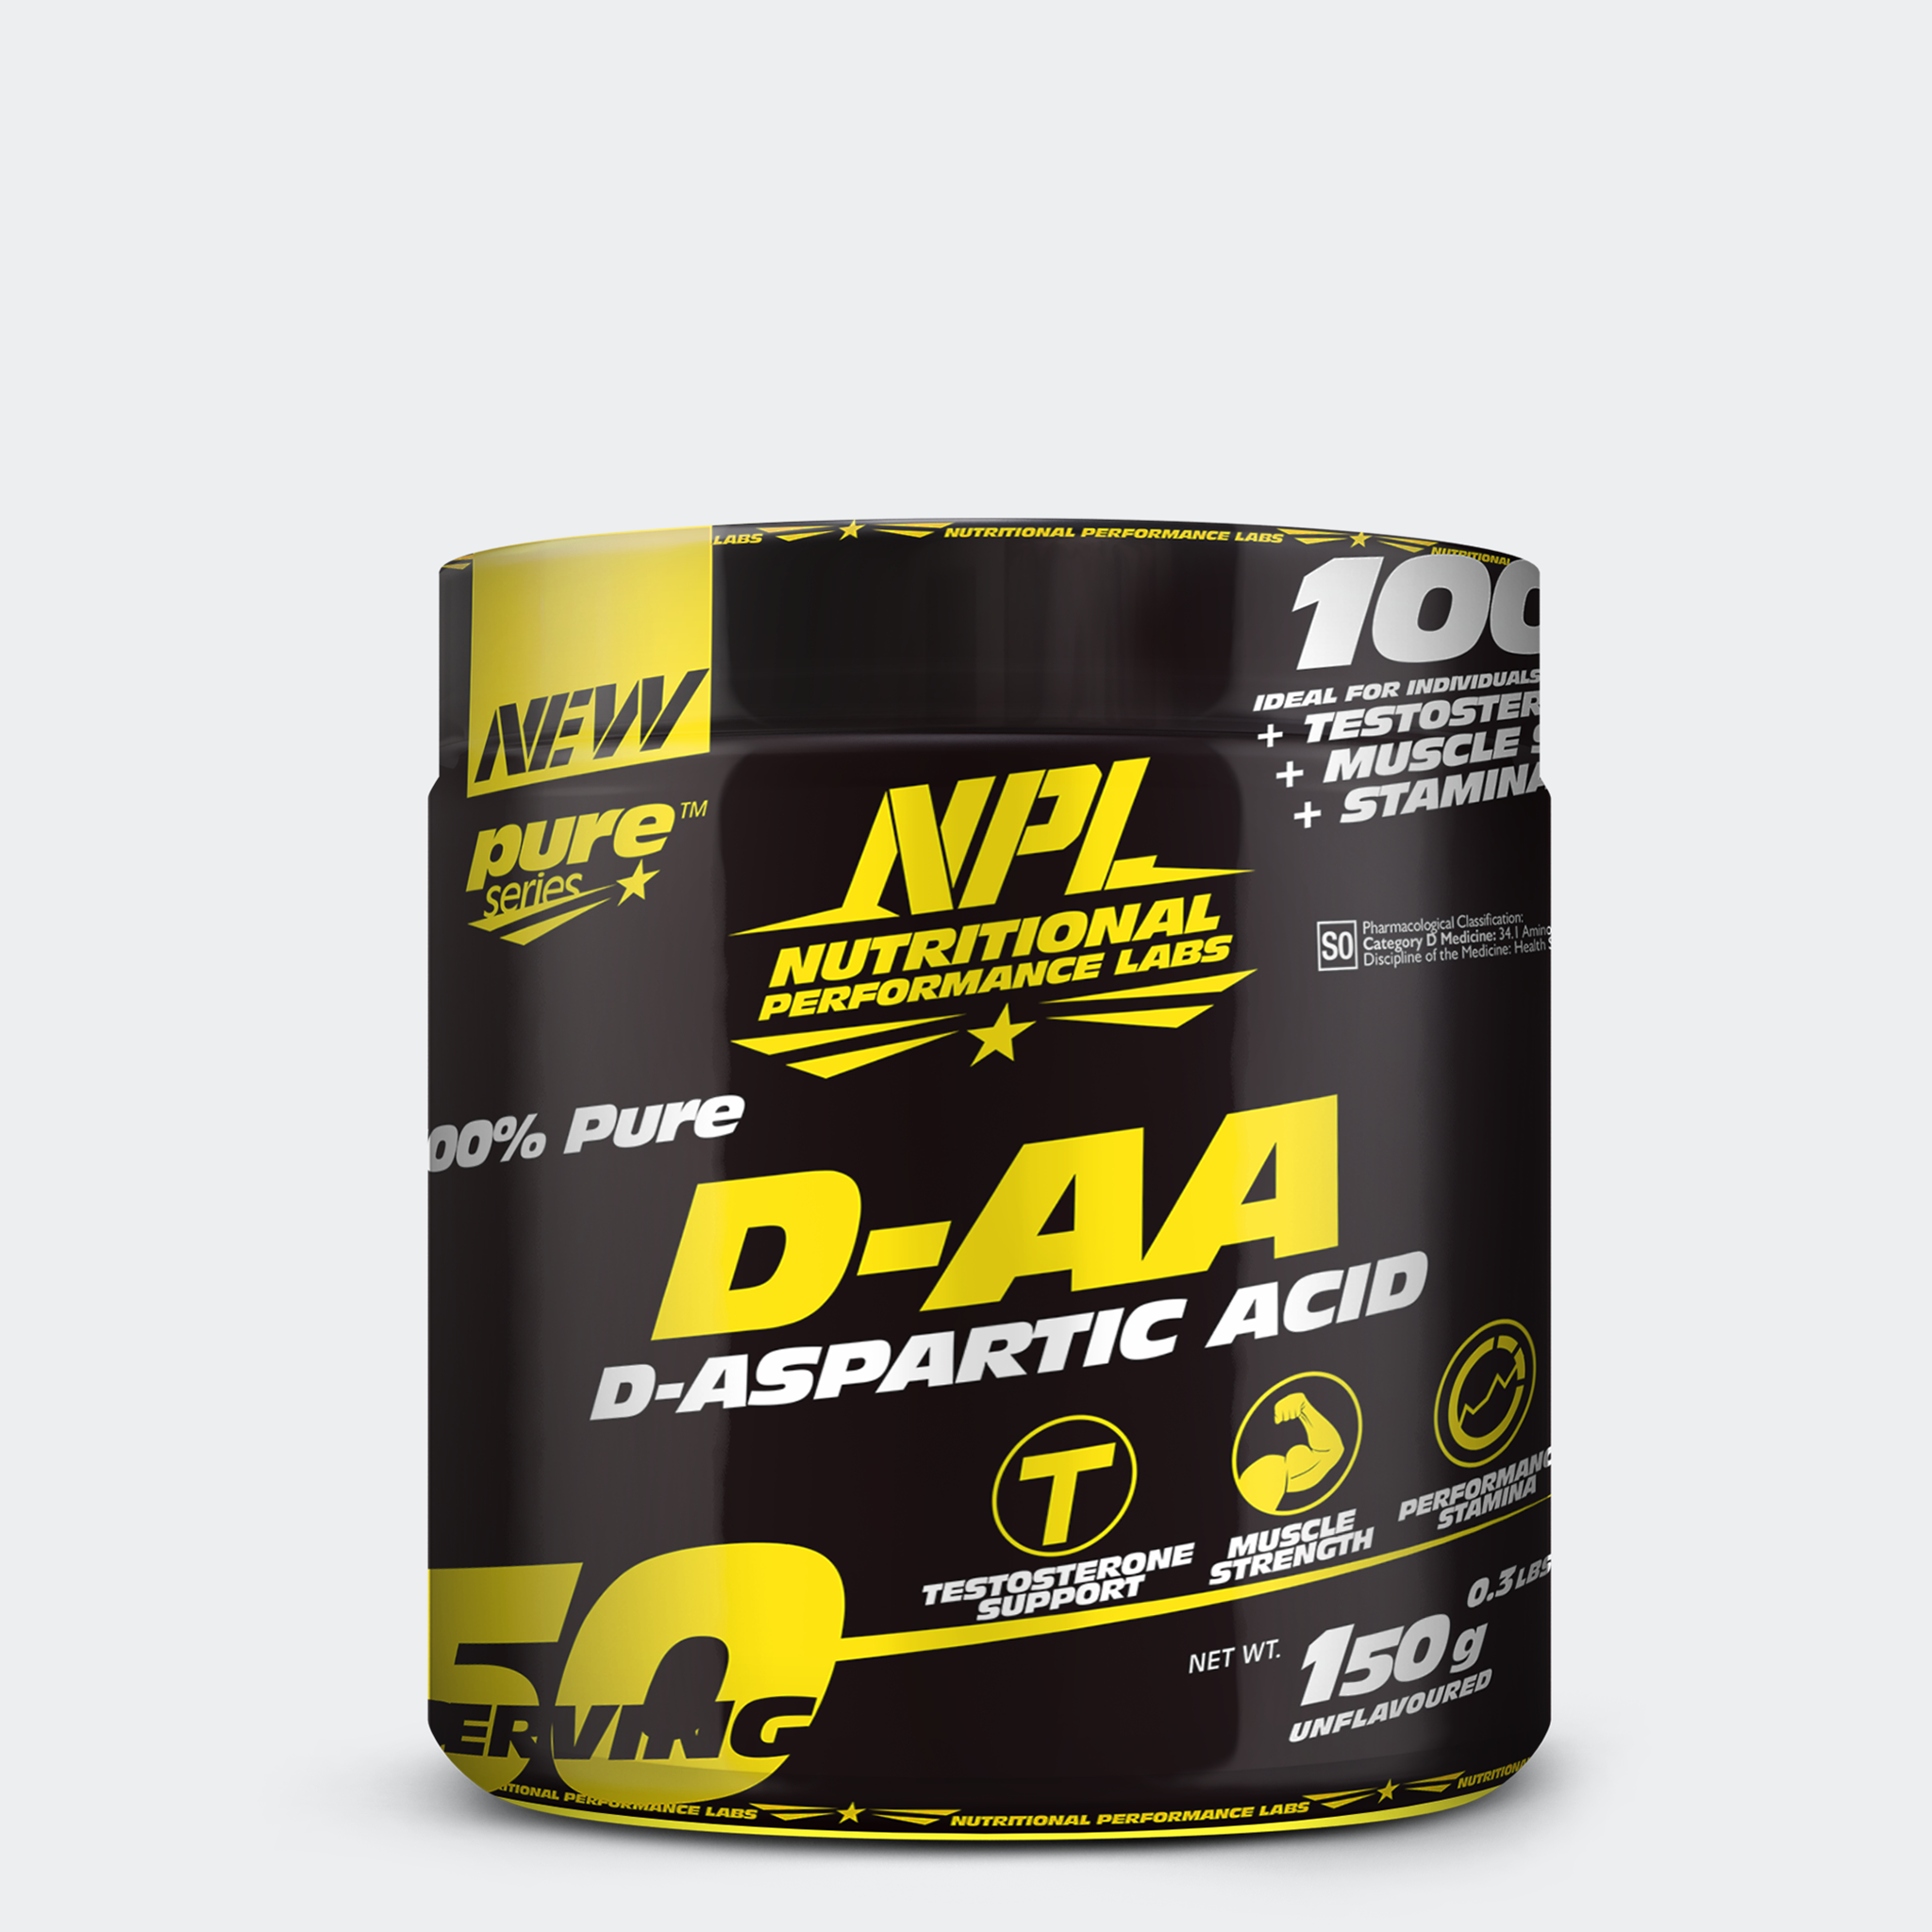 NPL D-aspartic acid, or D-AA, is an amino acid that can be found in regions of the brain as well as reproductive tissues and may lead to the release of certain hormones that ultimately increase testosterone production